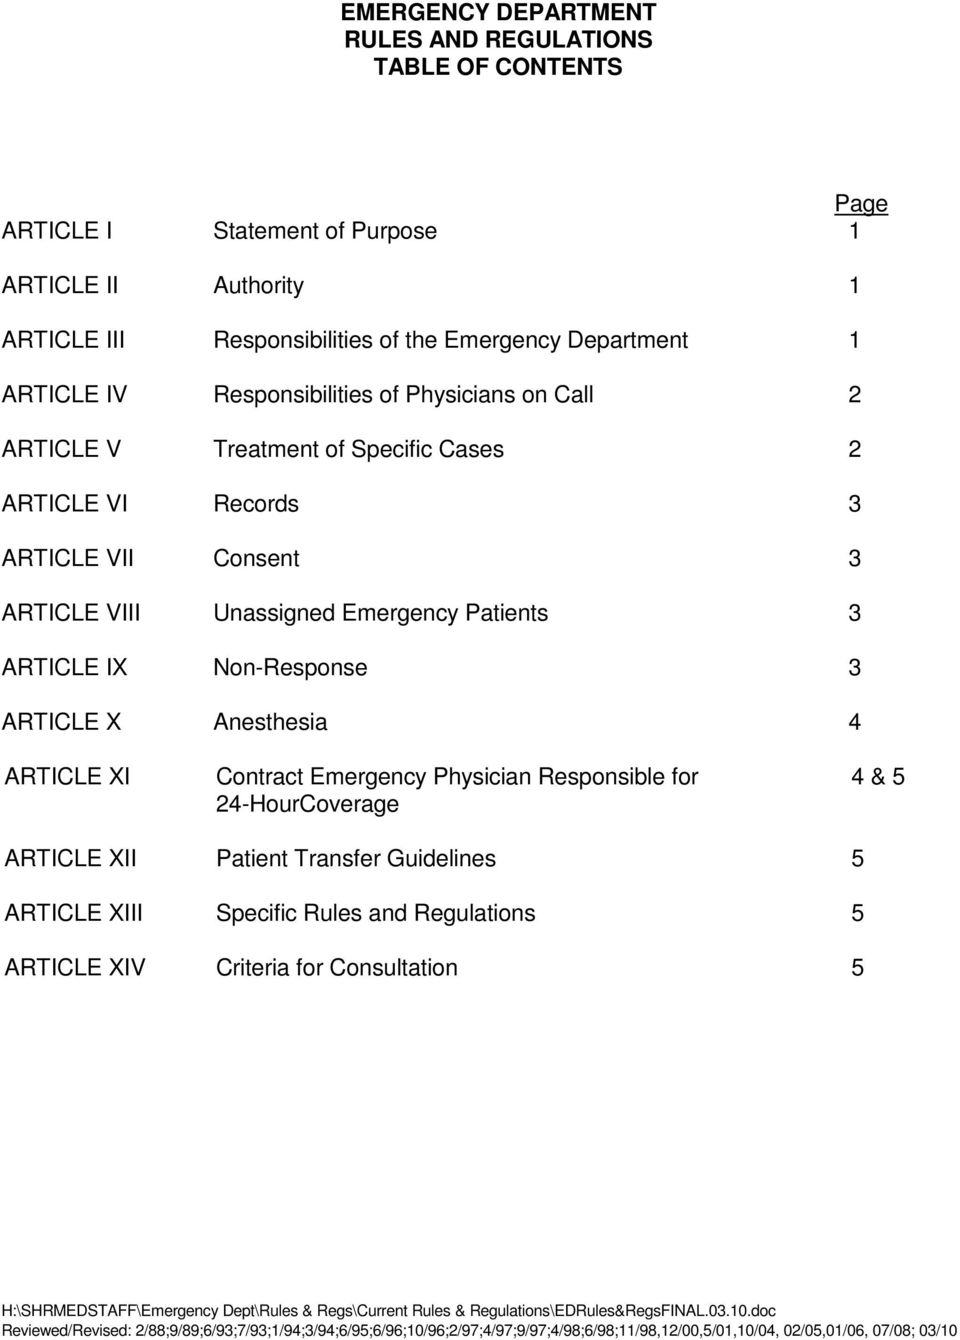 VI Records 3 ARTICLE VII Consent 3 ARTICLE VIII Unassigned Emergency Patients 3 ARTICLE IX Non-Response 3 ARTICLE X Anesthesia 4 ARTICLE XI Contract